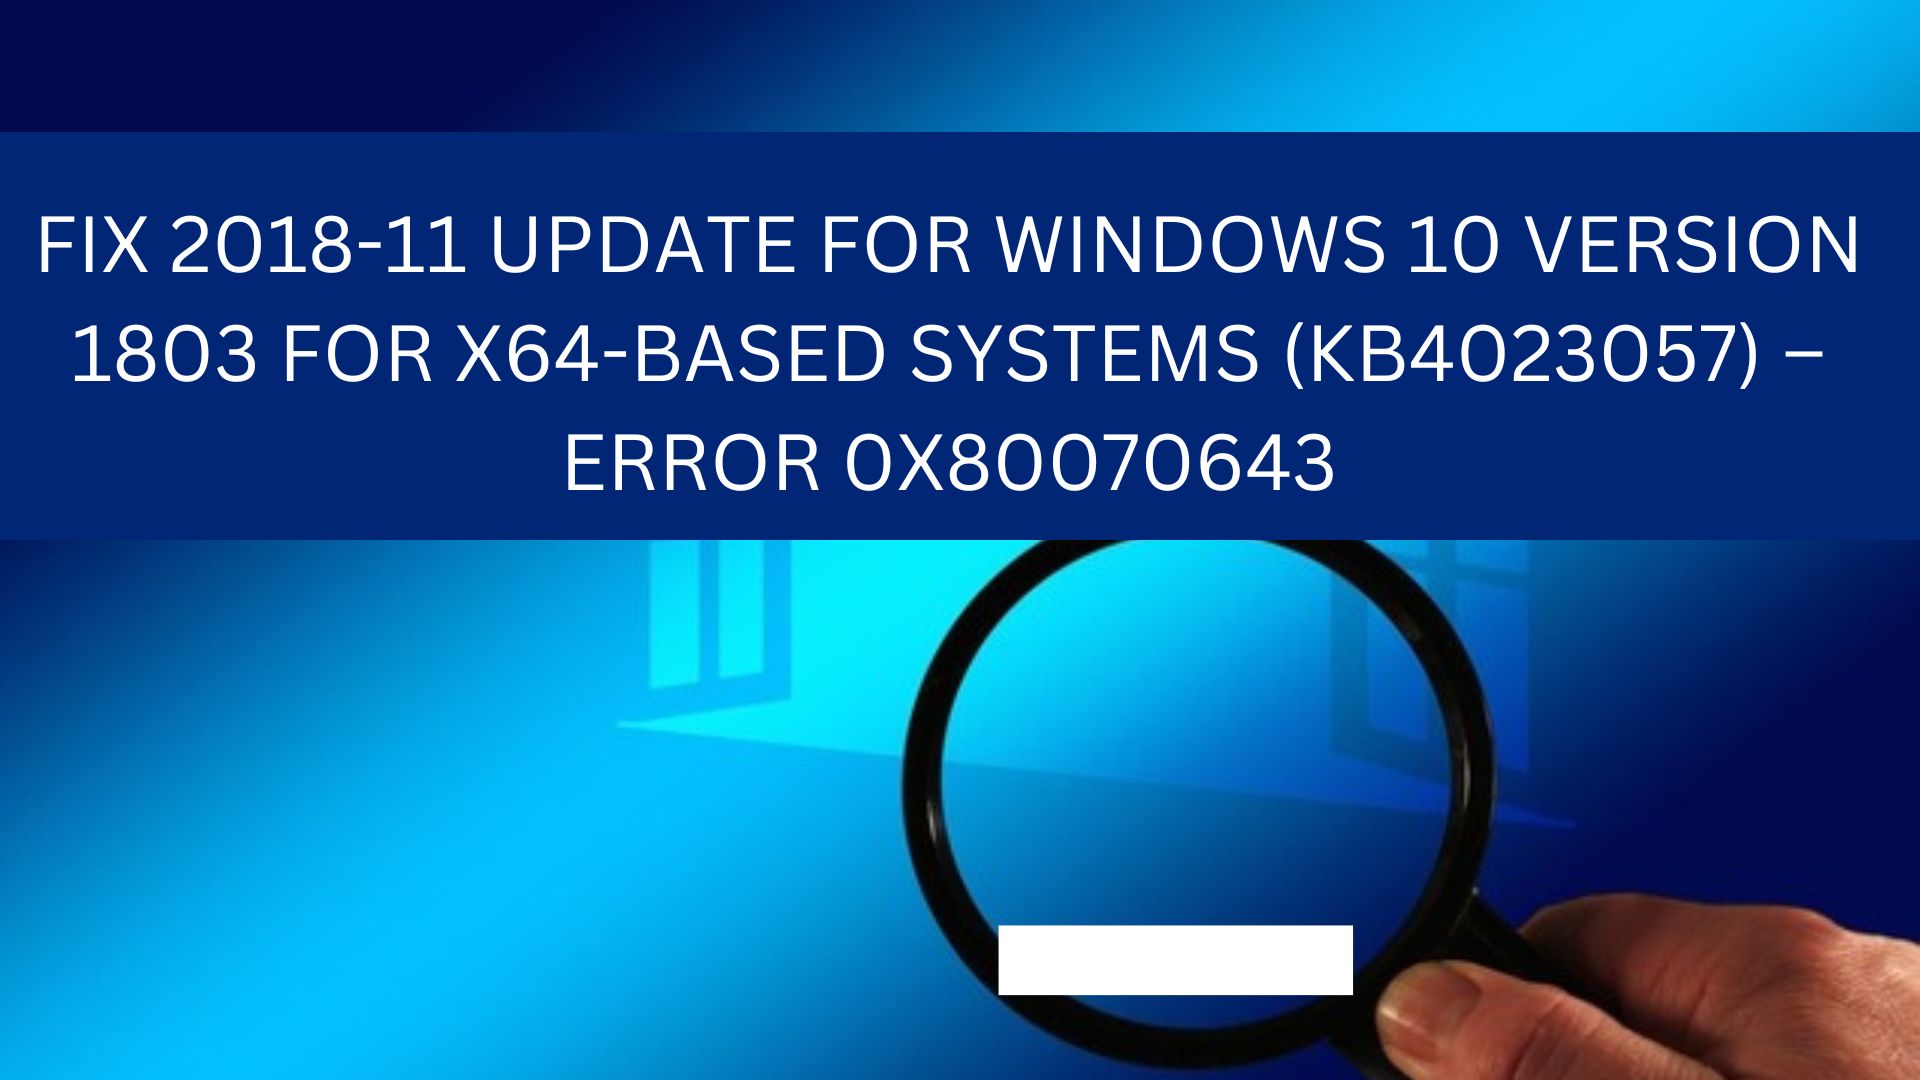 FIX 2018-11 UPDATE FOR WINDOWS 10 VERSION 1803 FOR X64-BASED SYSTEMS (KB4023057) – ERROR 0X80070643